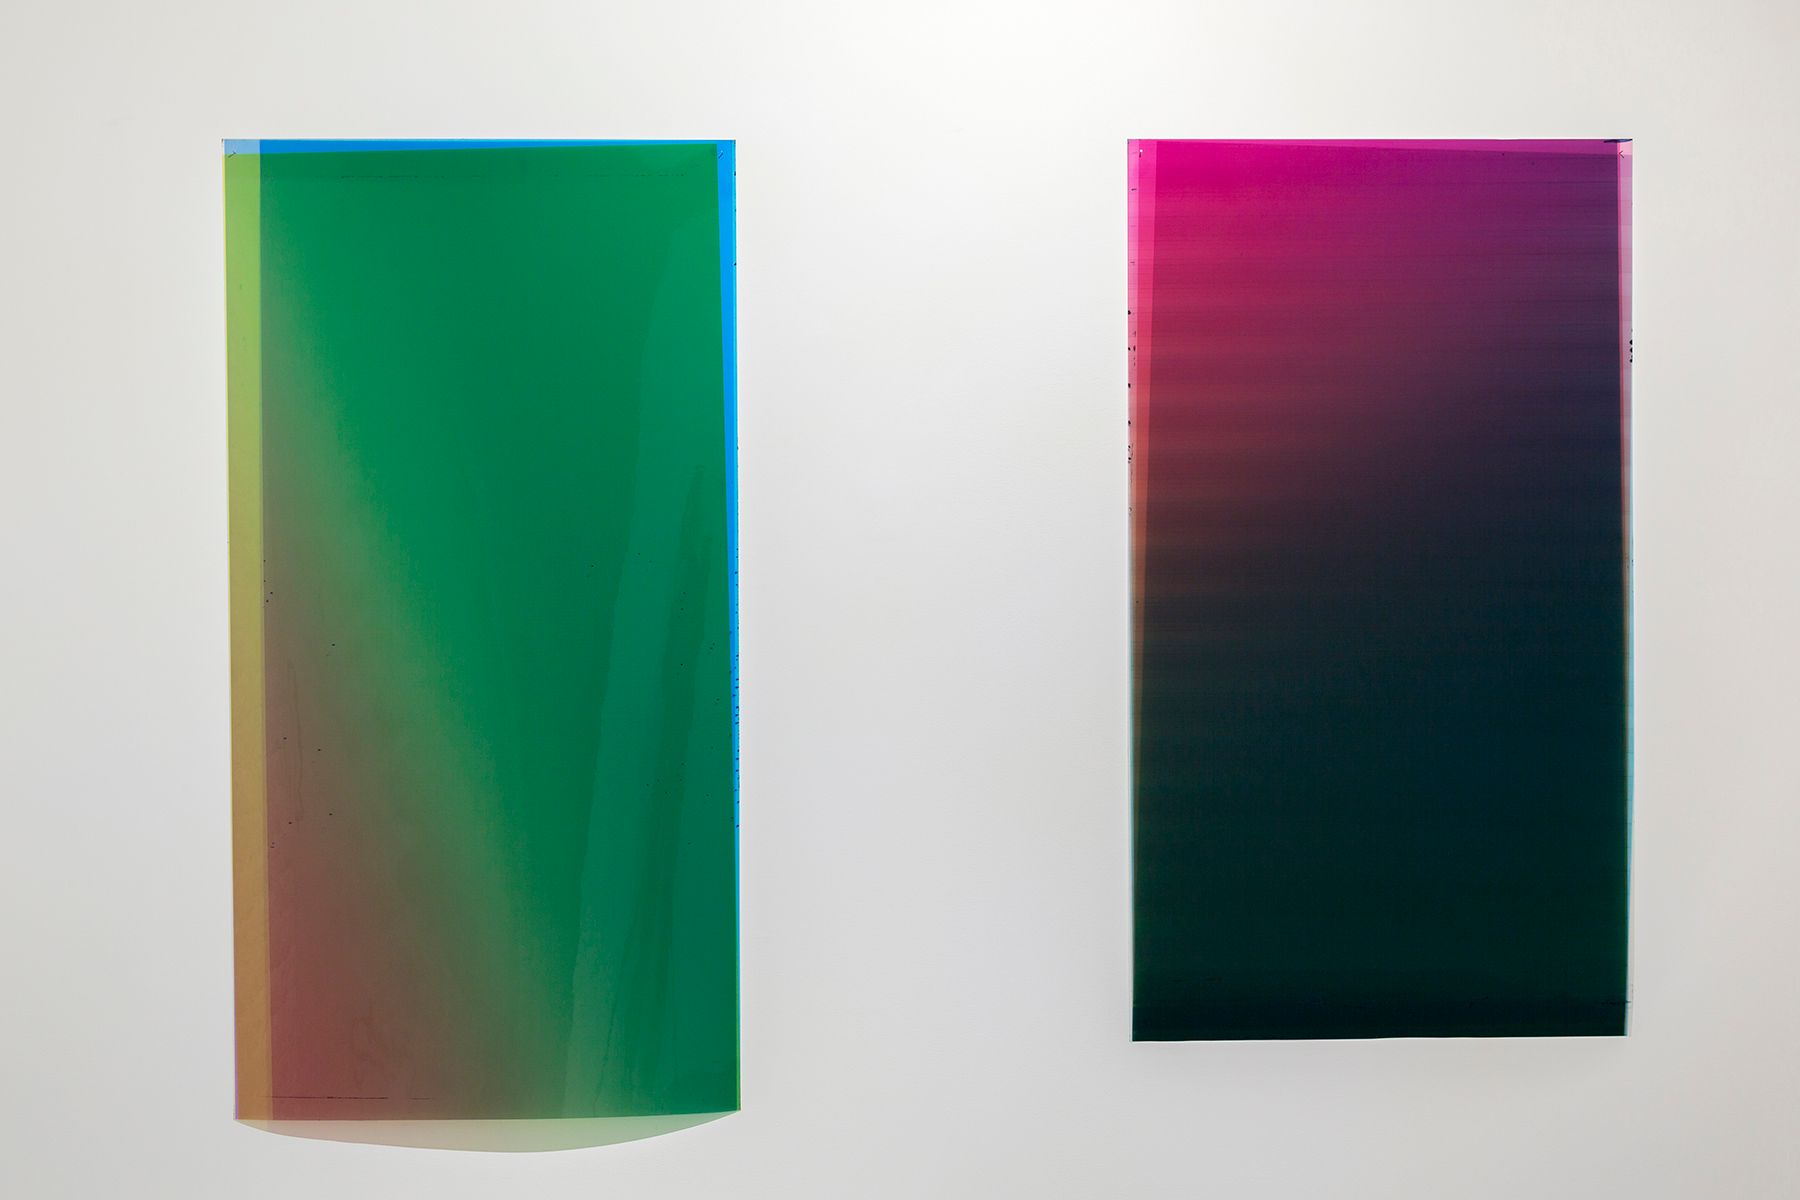 Caline Aoun, Untitled, 2013 and Untitled, 2013,